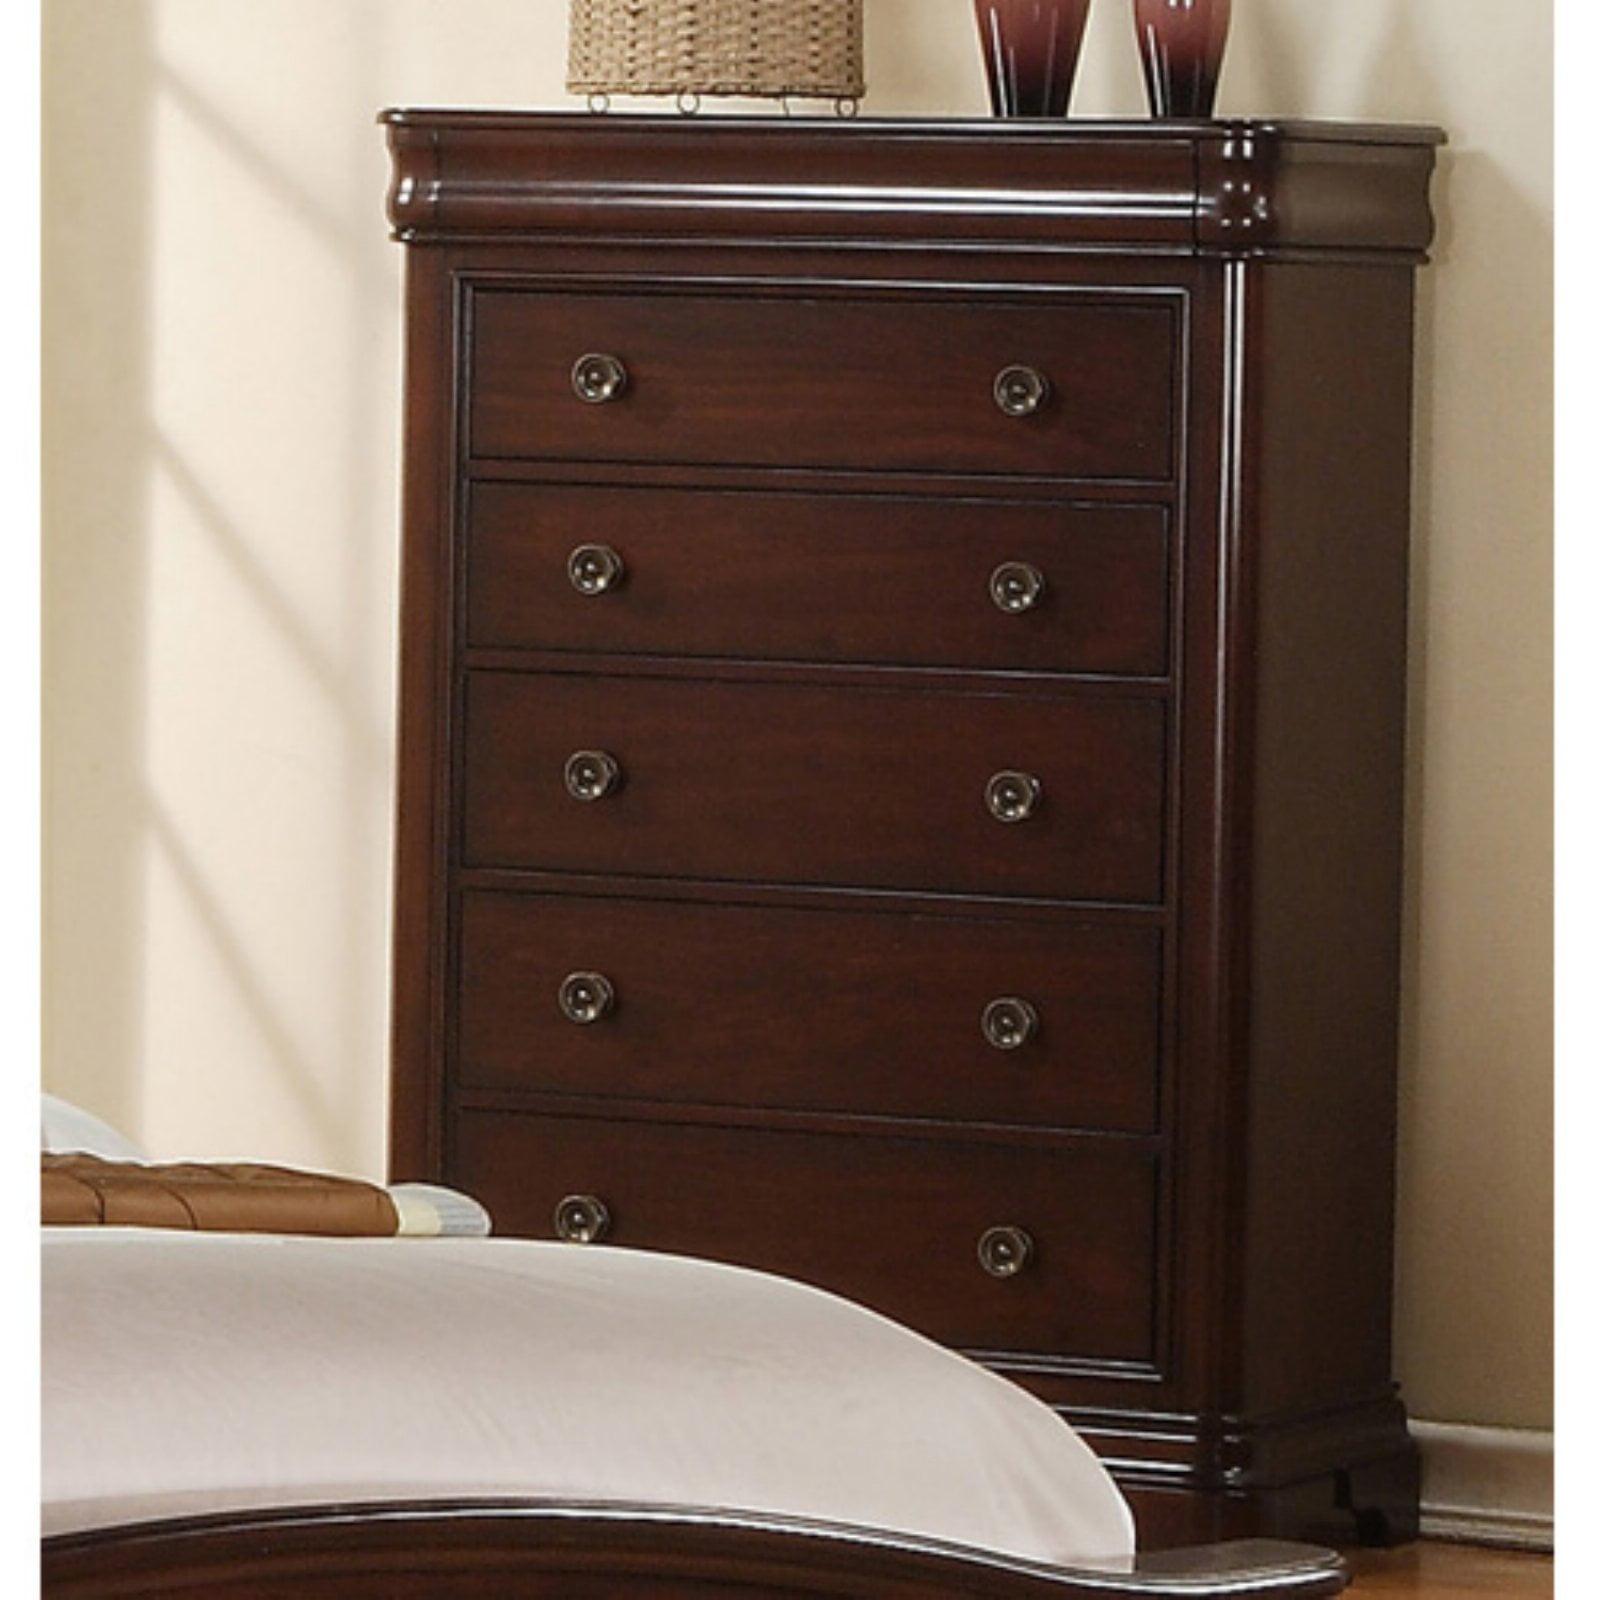 Traditional Cherry Brown 6-Drawer Vertical Chest with Felt-Lined Top Drawer